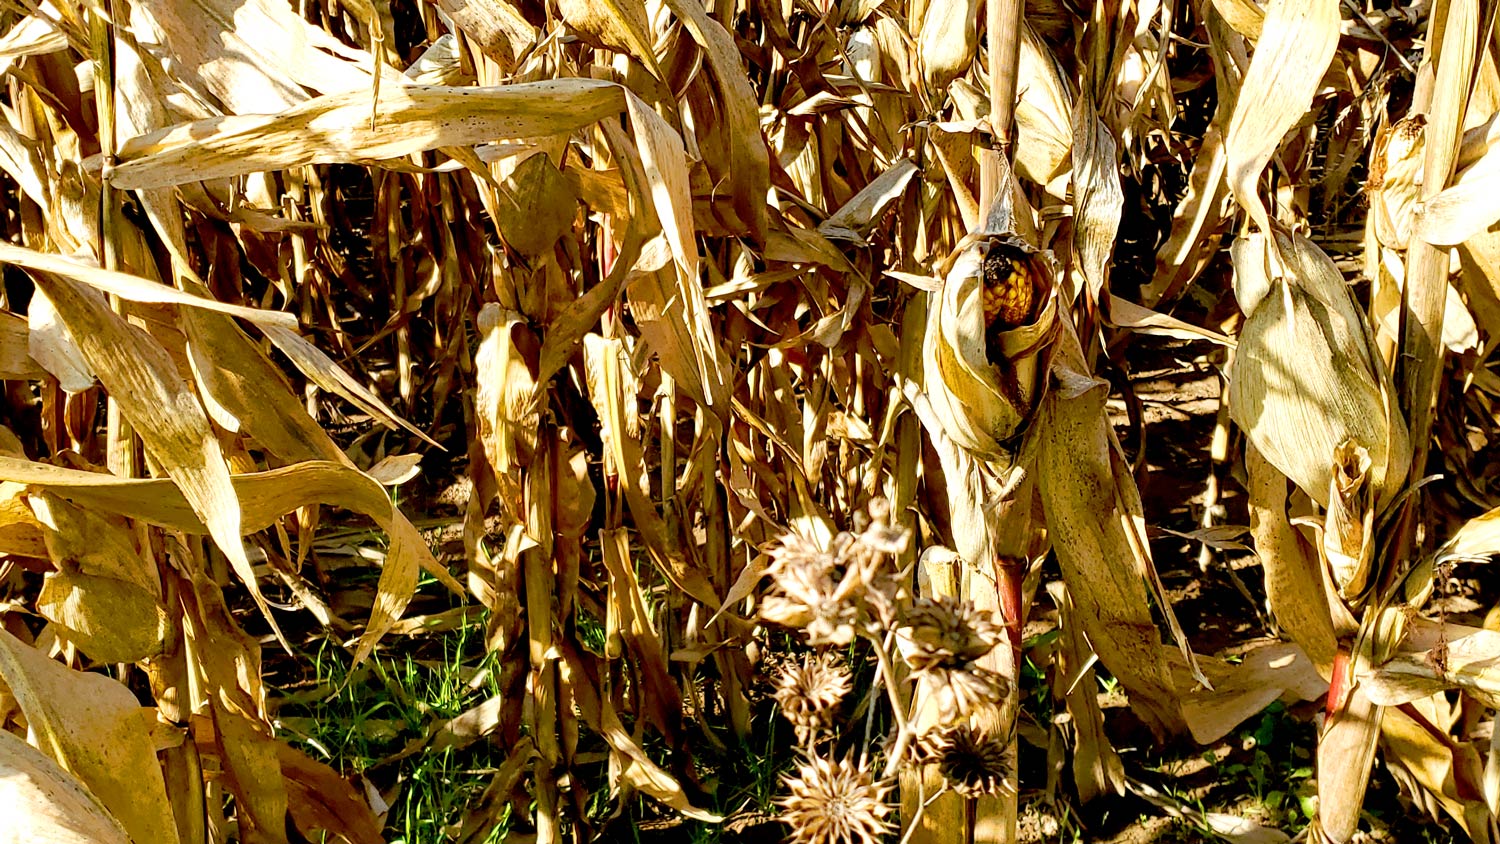 Ear of corn at Cody's Farm and Orchard.